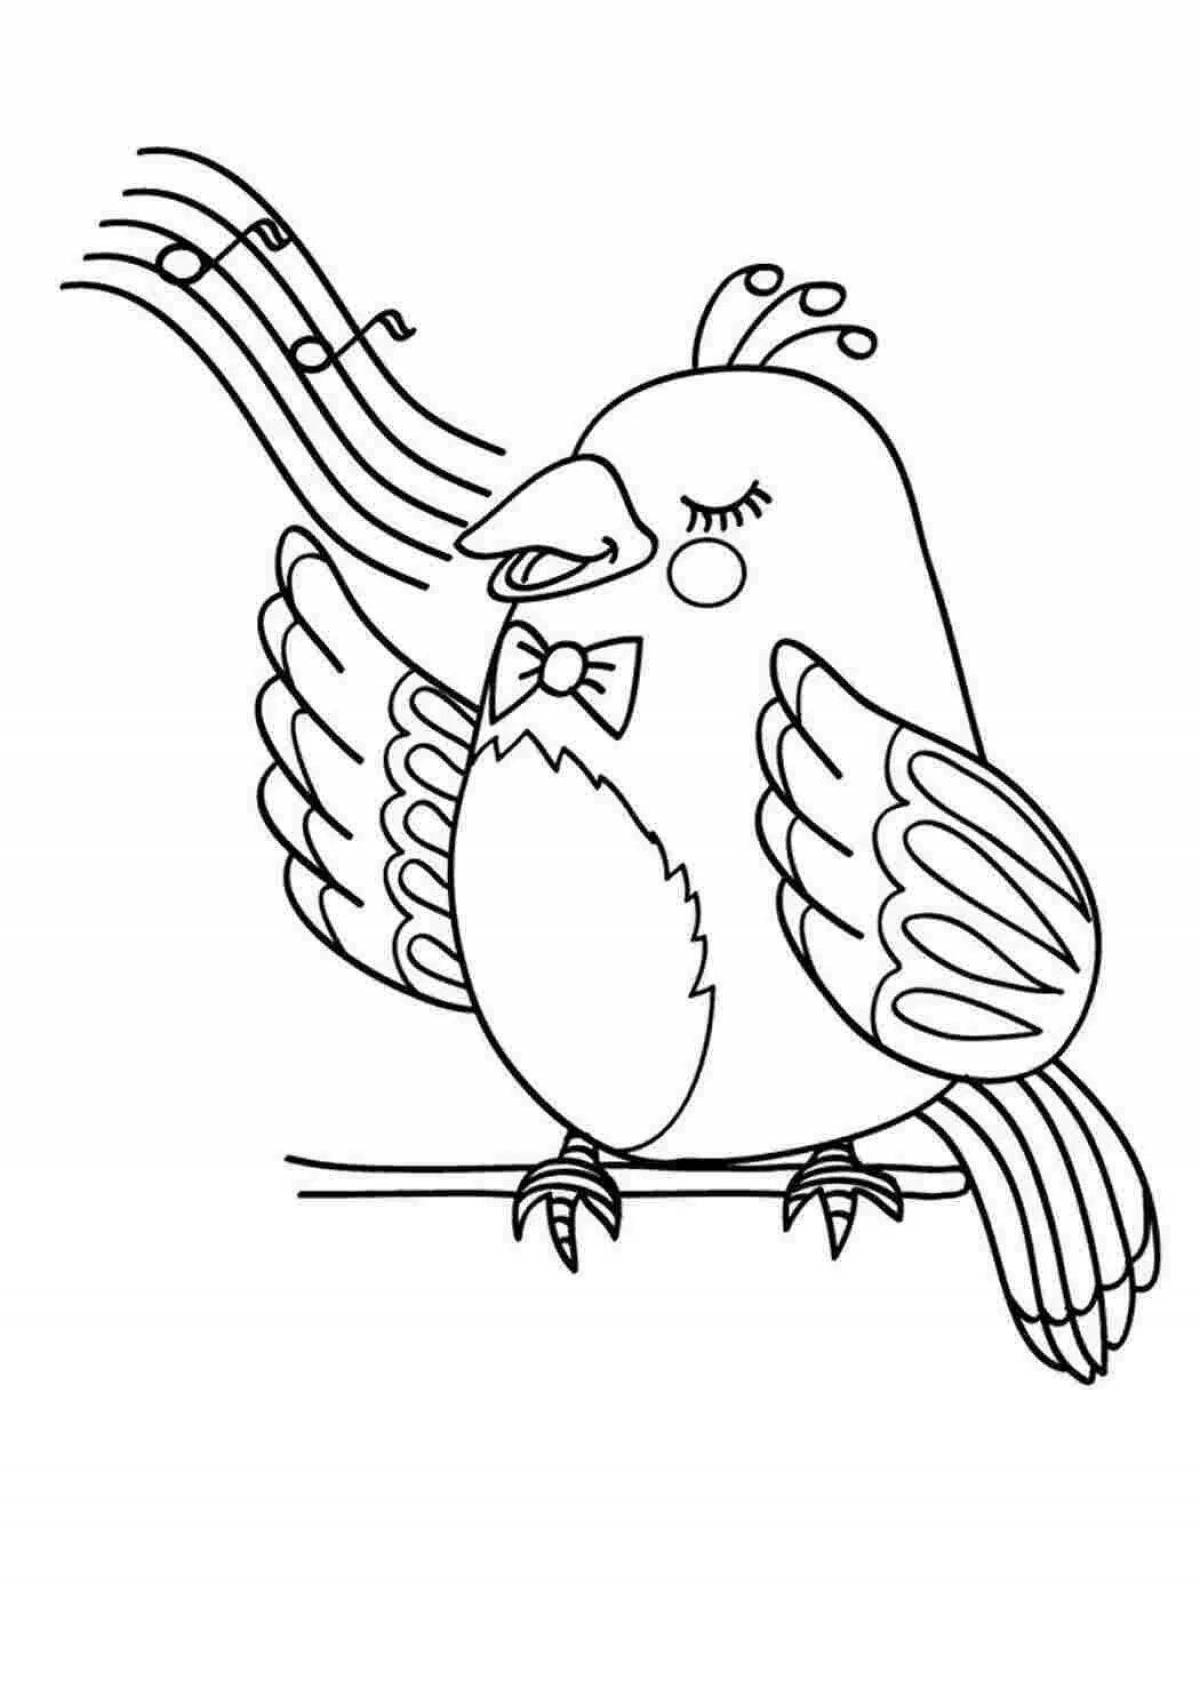 Fancy nightingale coloring book for kids